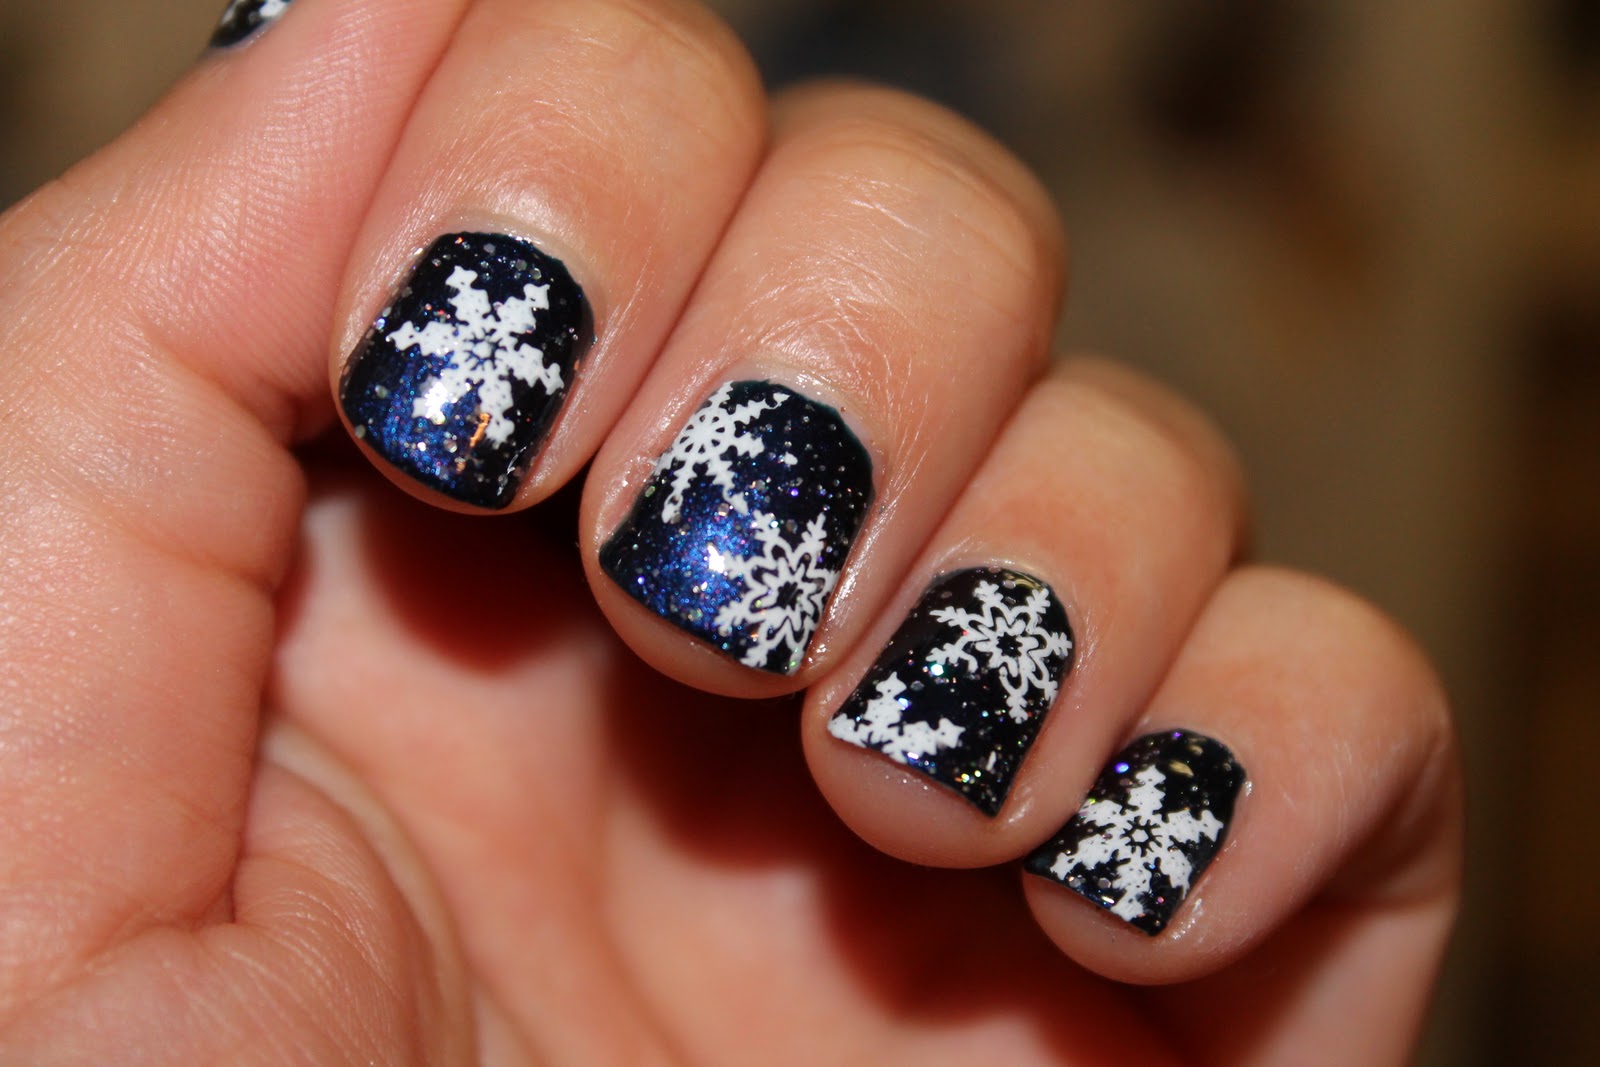 7. Snowflake Nail Designs for December - wide 2